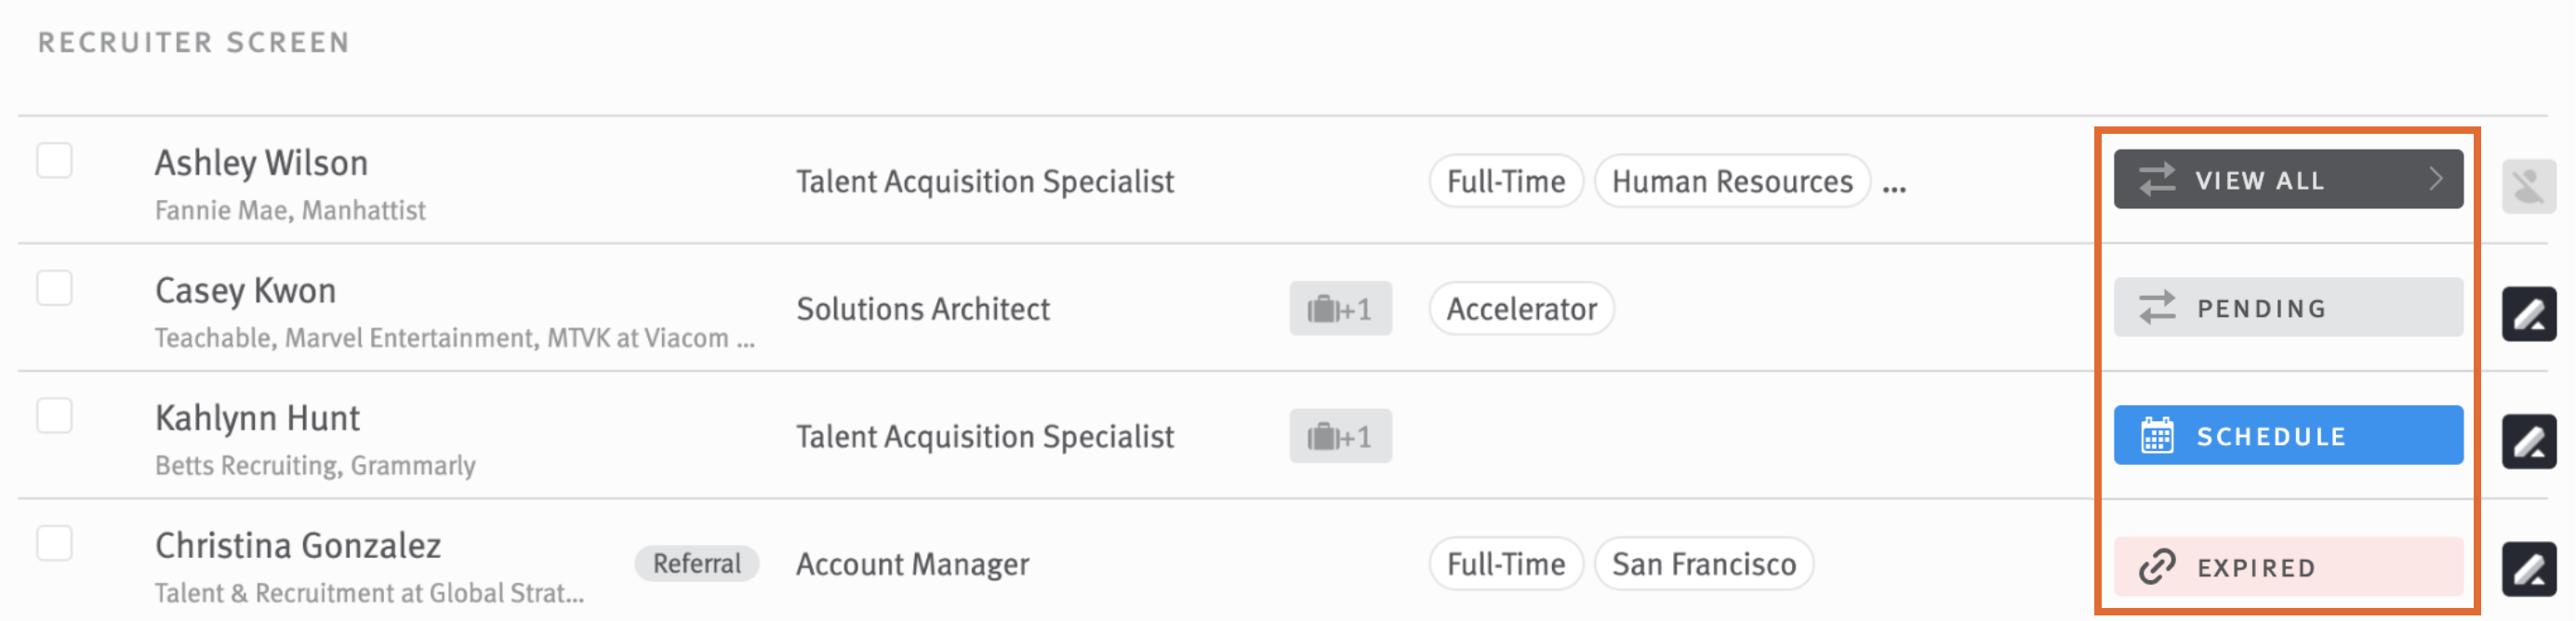 Call to action buttons outlined next to opportunities in candidate list